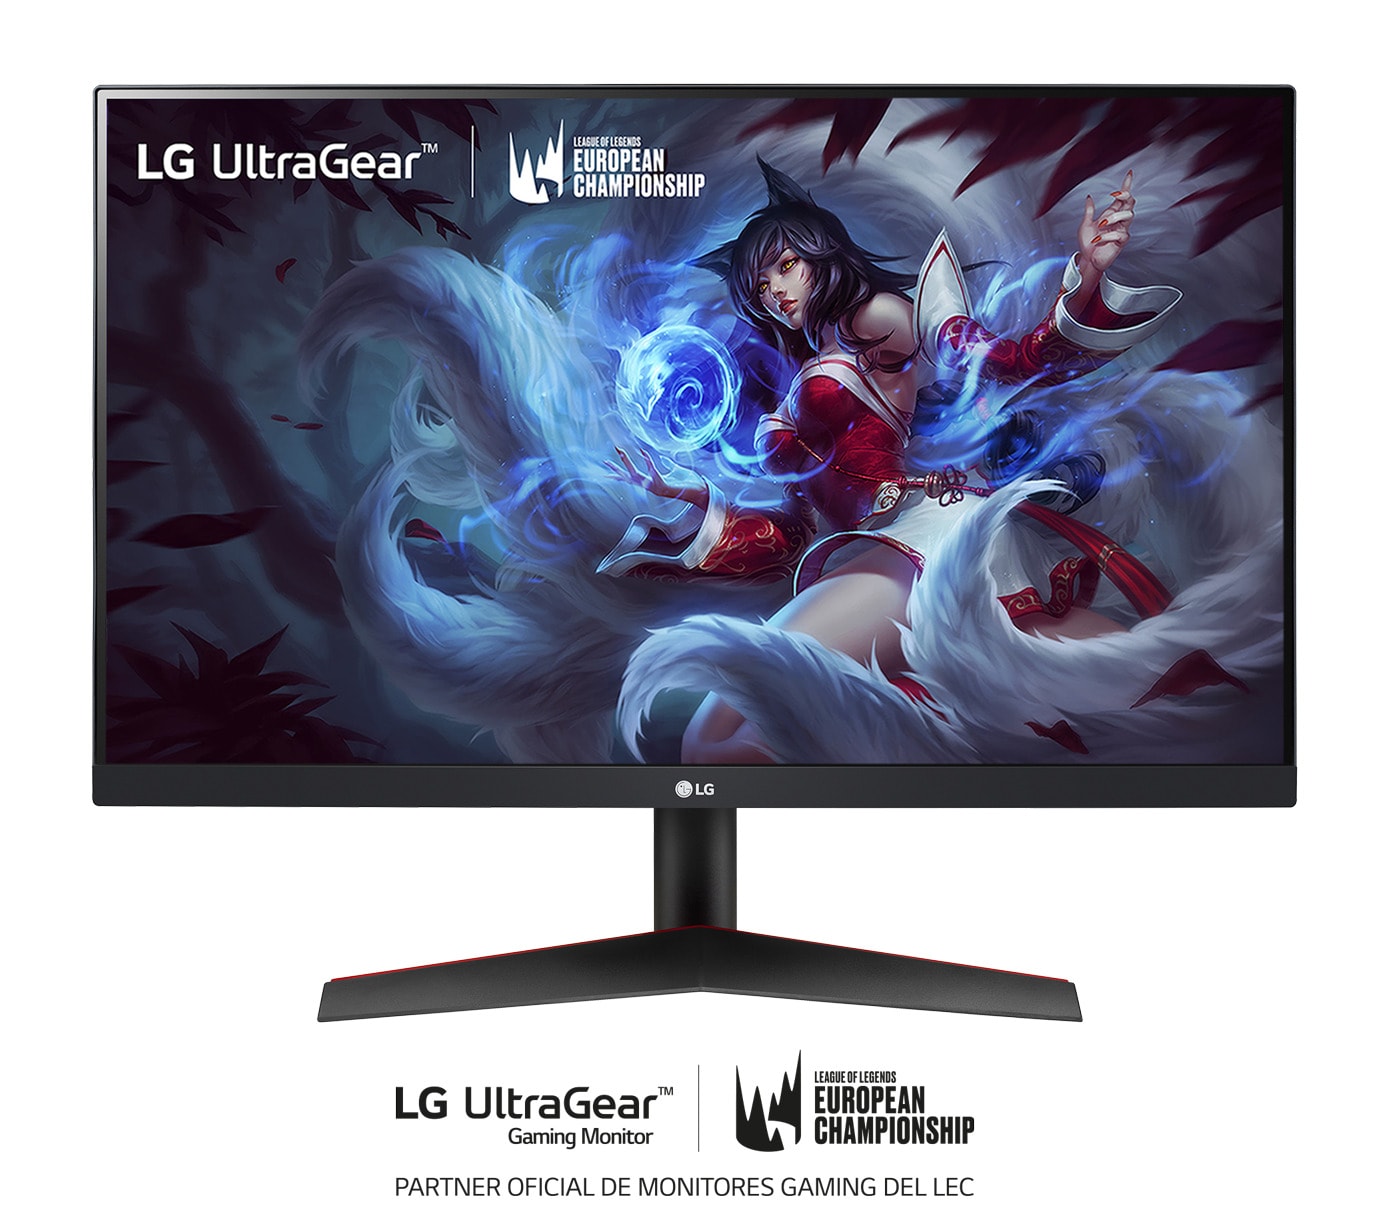 LG 24'' UltraGear FHD IPS 1ms 144Hz HDR Monitor with FreeSync